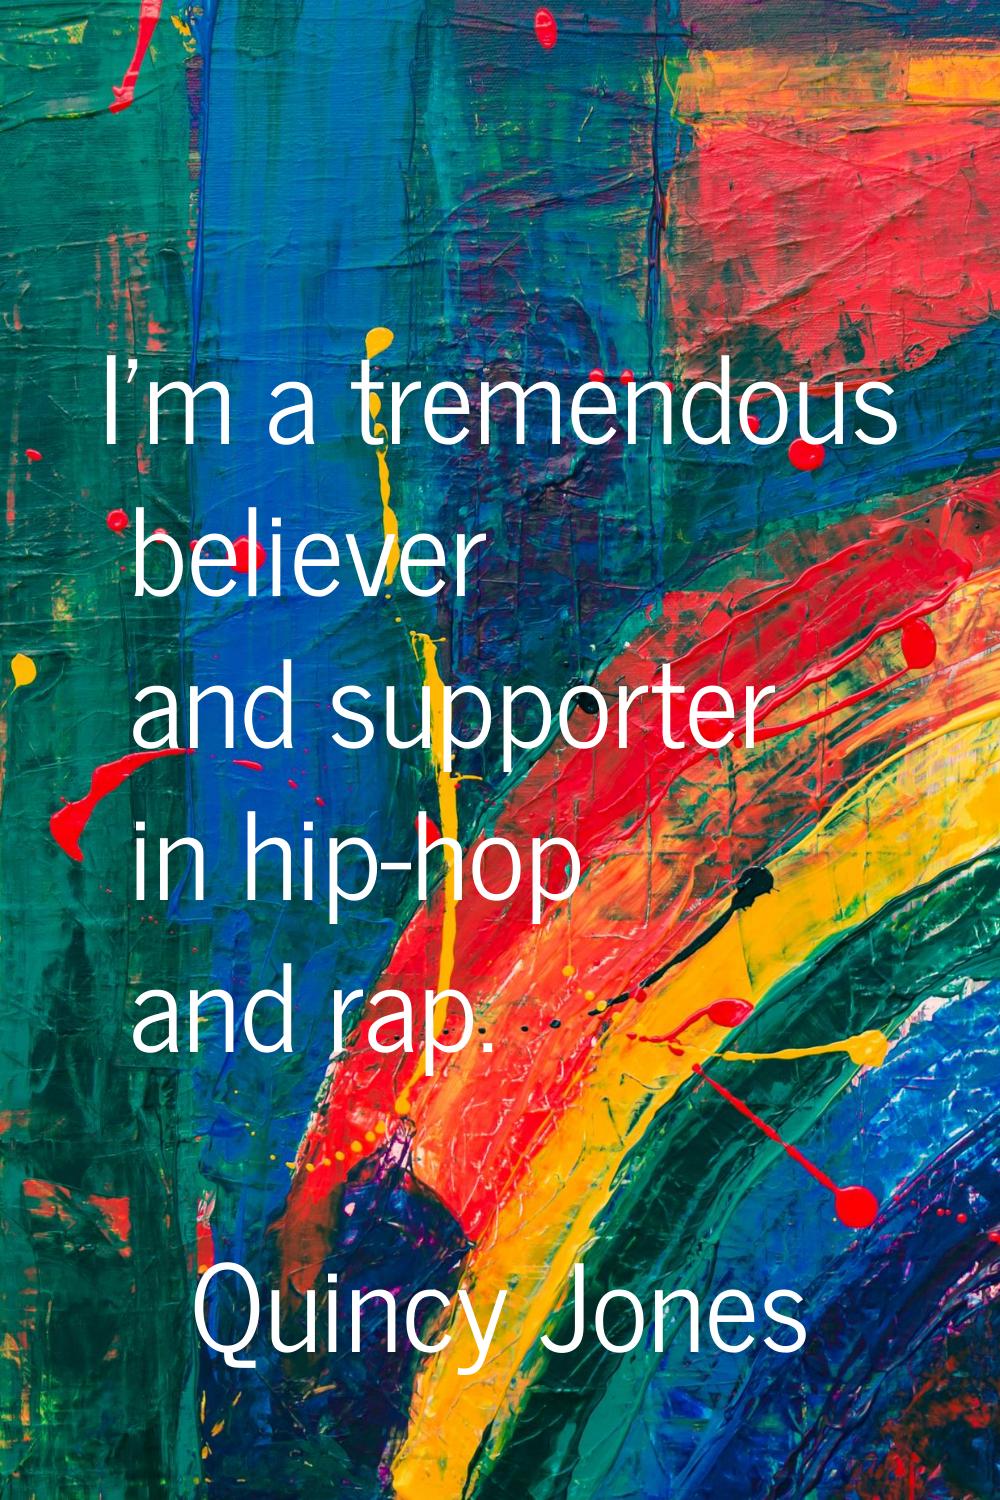 I'm a tremendous believer and supporter in hip-hop and rap.